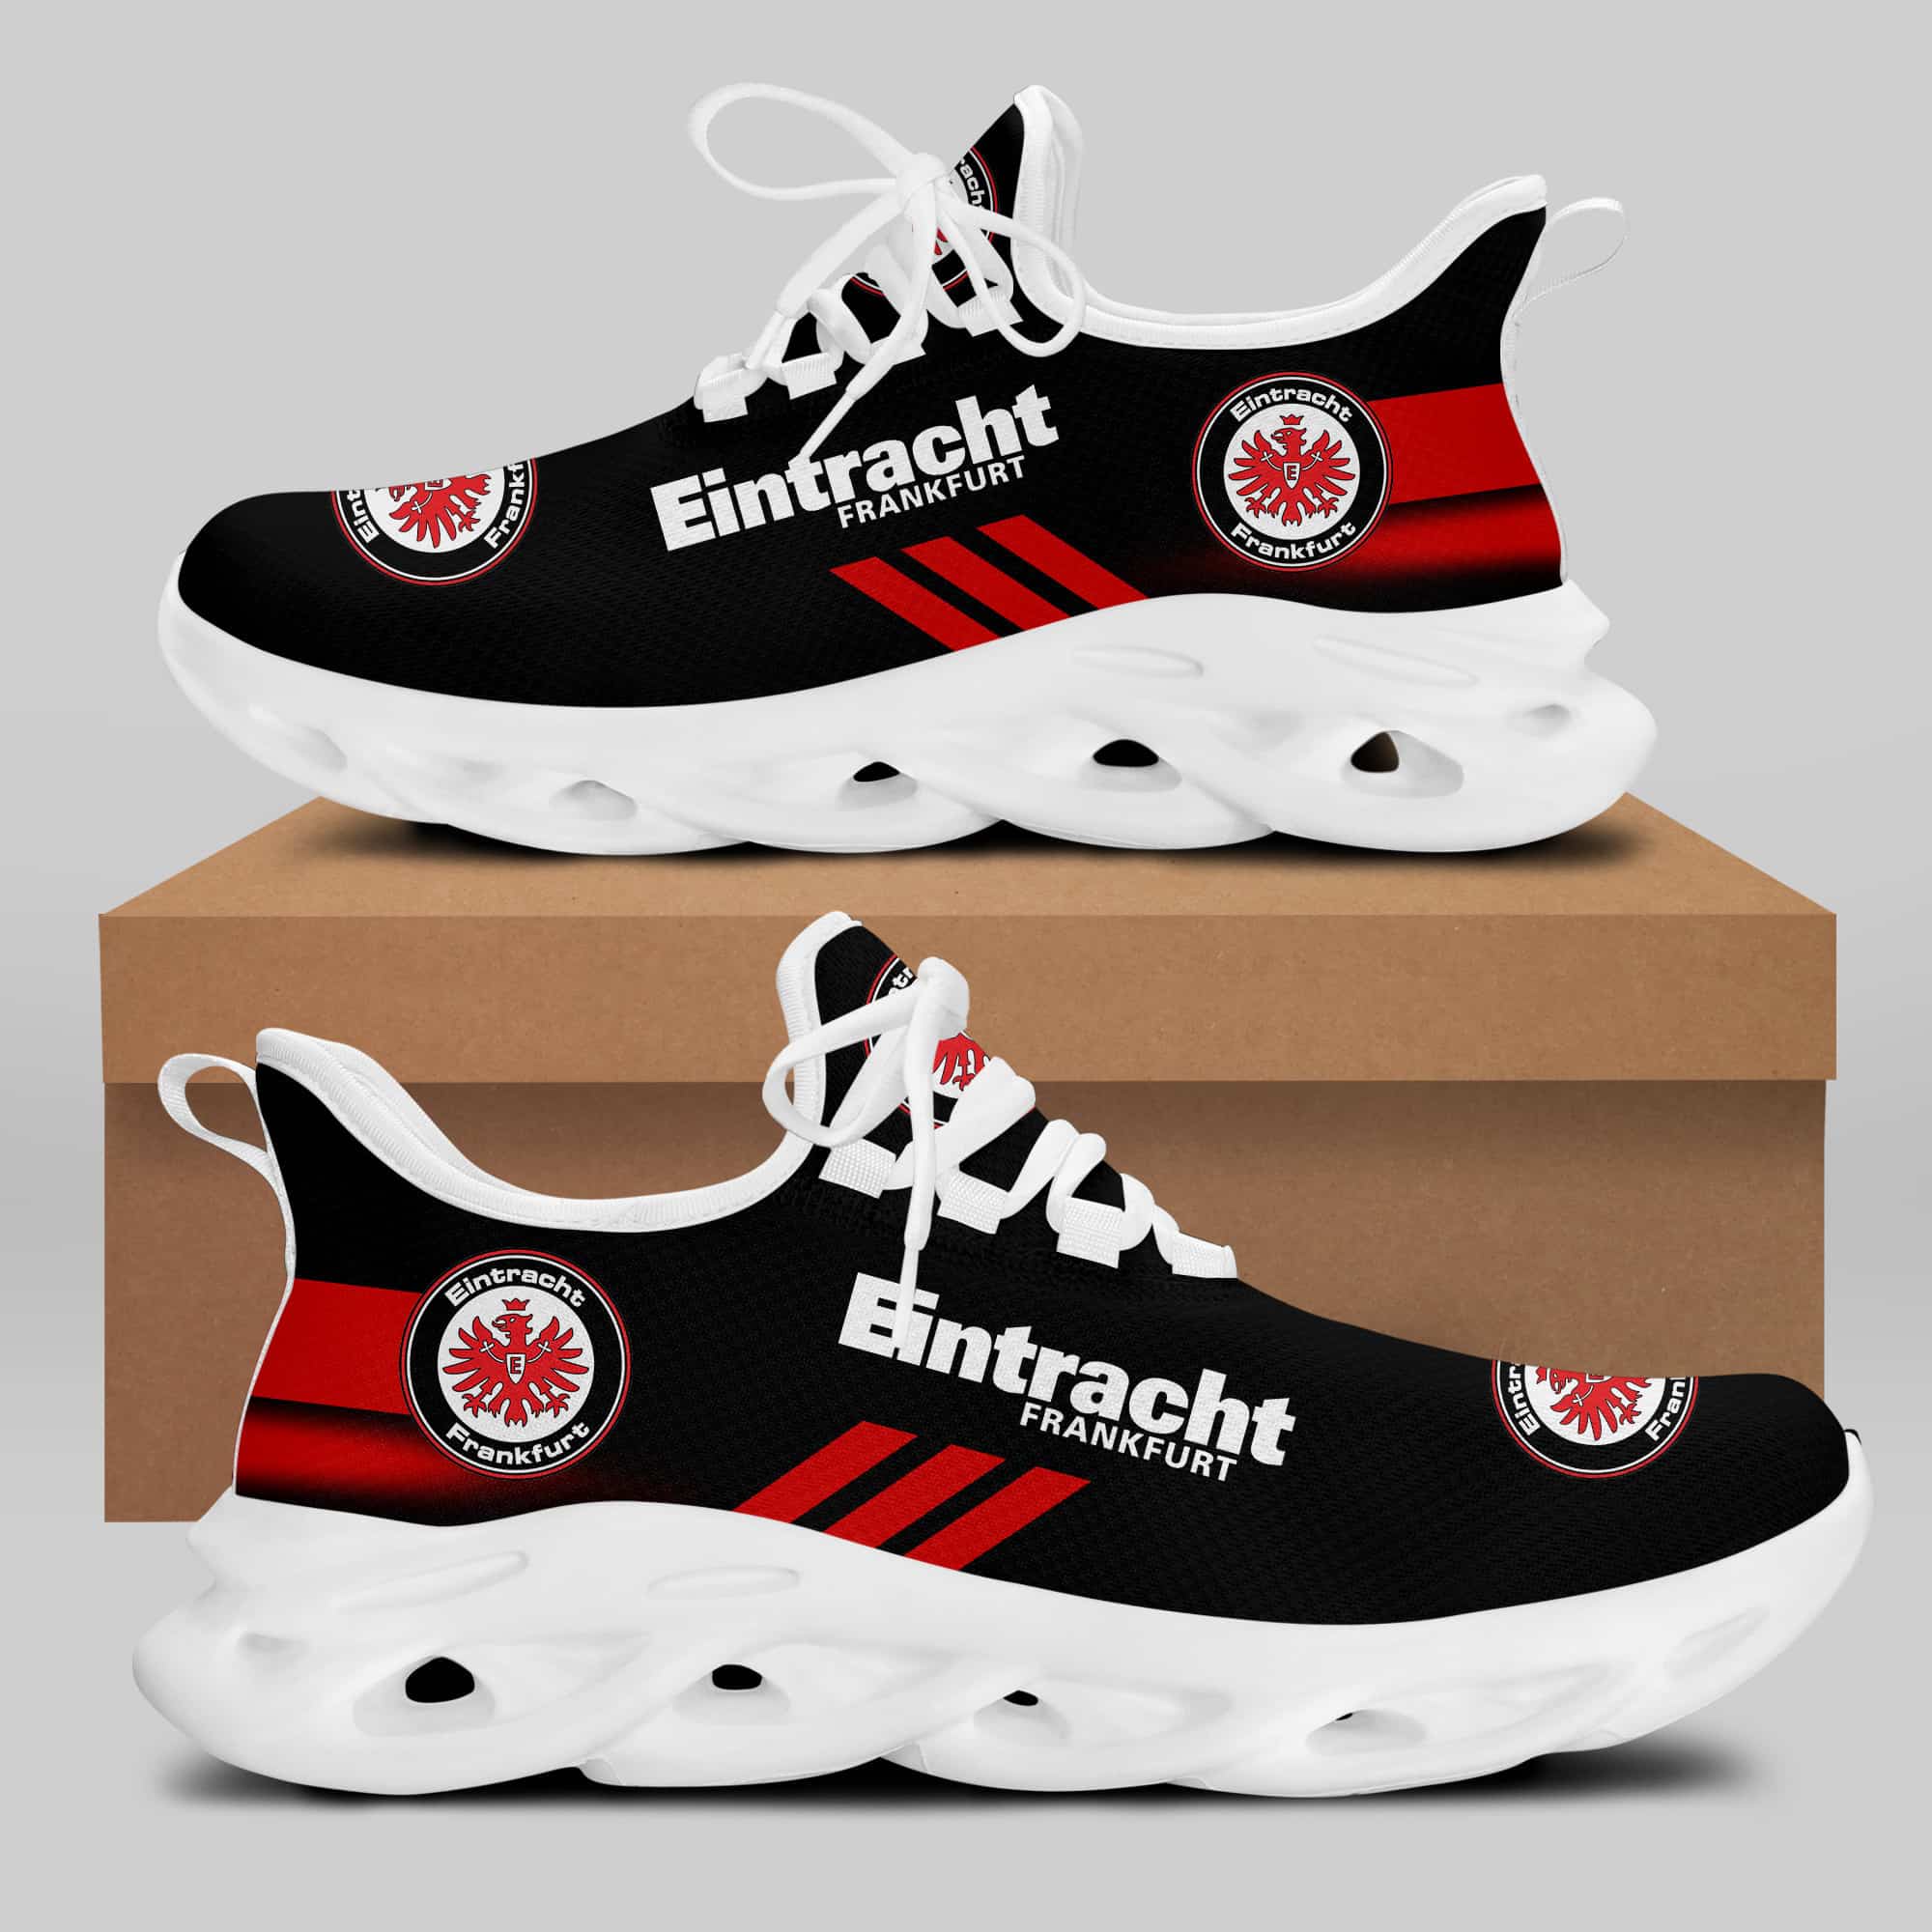 Eintracht Frankfurt Running Shoes Max Soul Shoes Sneakers Ver 8 2